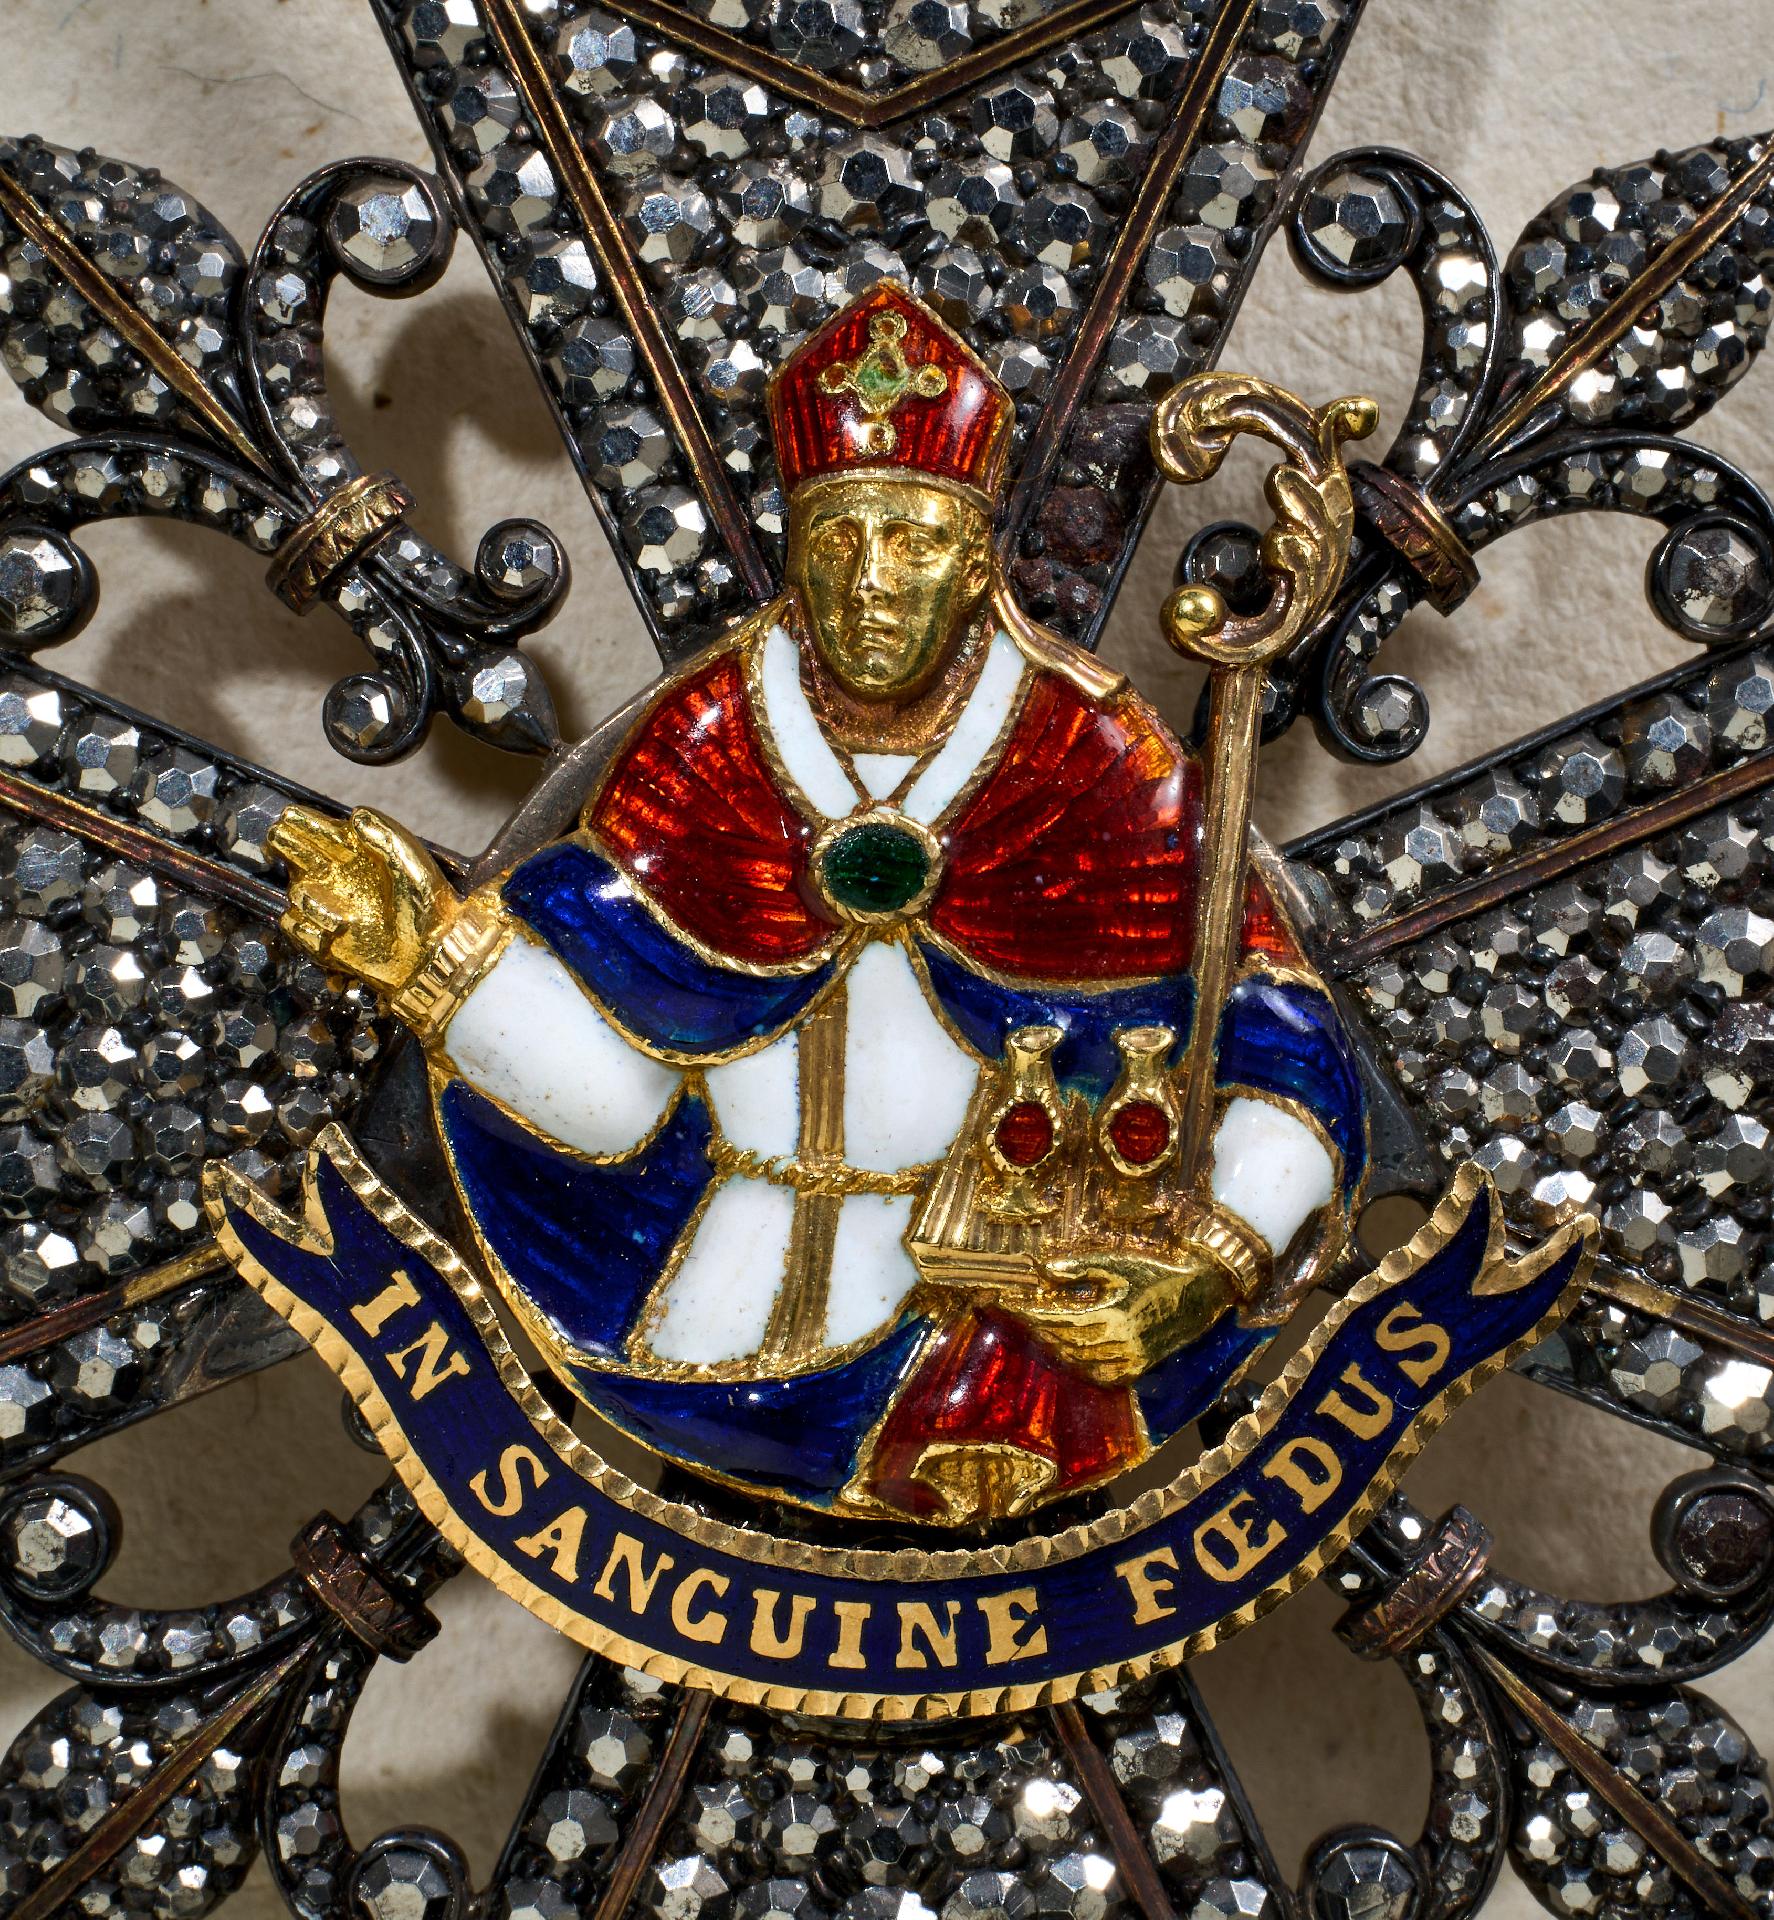 Königreich beider Sizilien : Order of St. Januarius Breast Star to the Ornamented Necklace. - Image 2 of 6